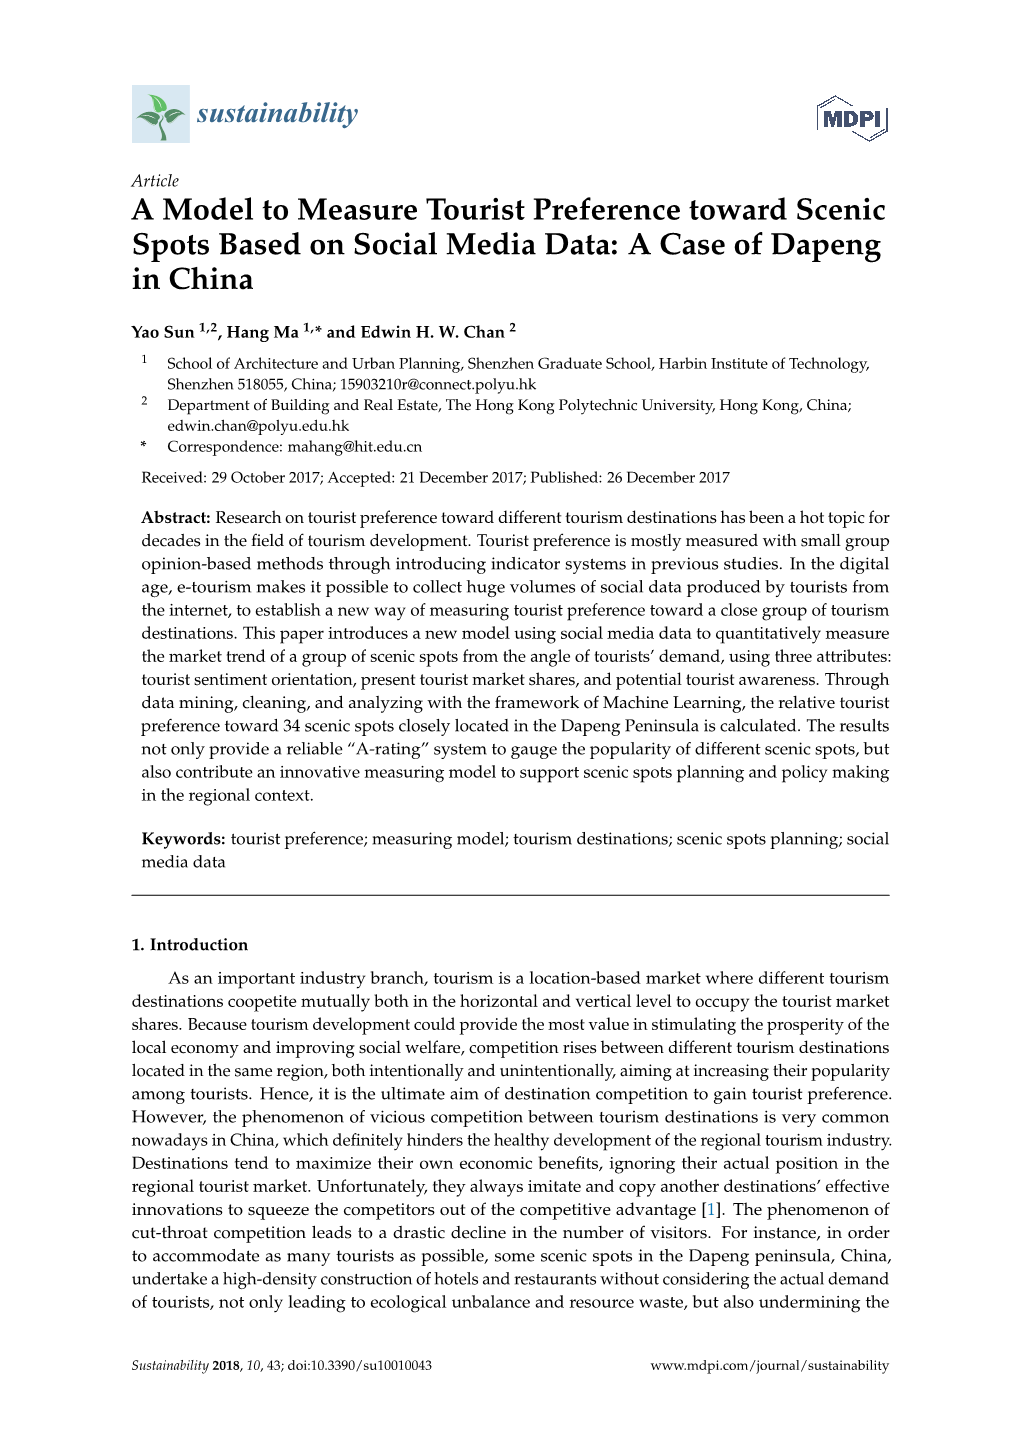 A Model to Measure Tourist Preference Toward Scenic Spots Based on Social Media Data: a Case of Dapeng in China